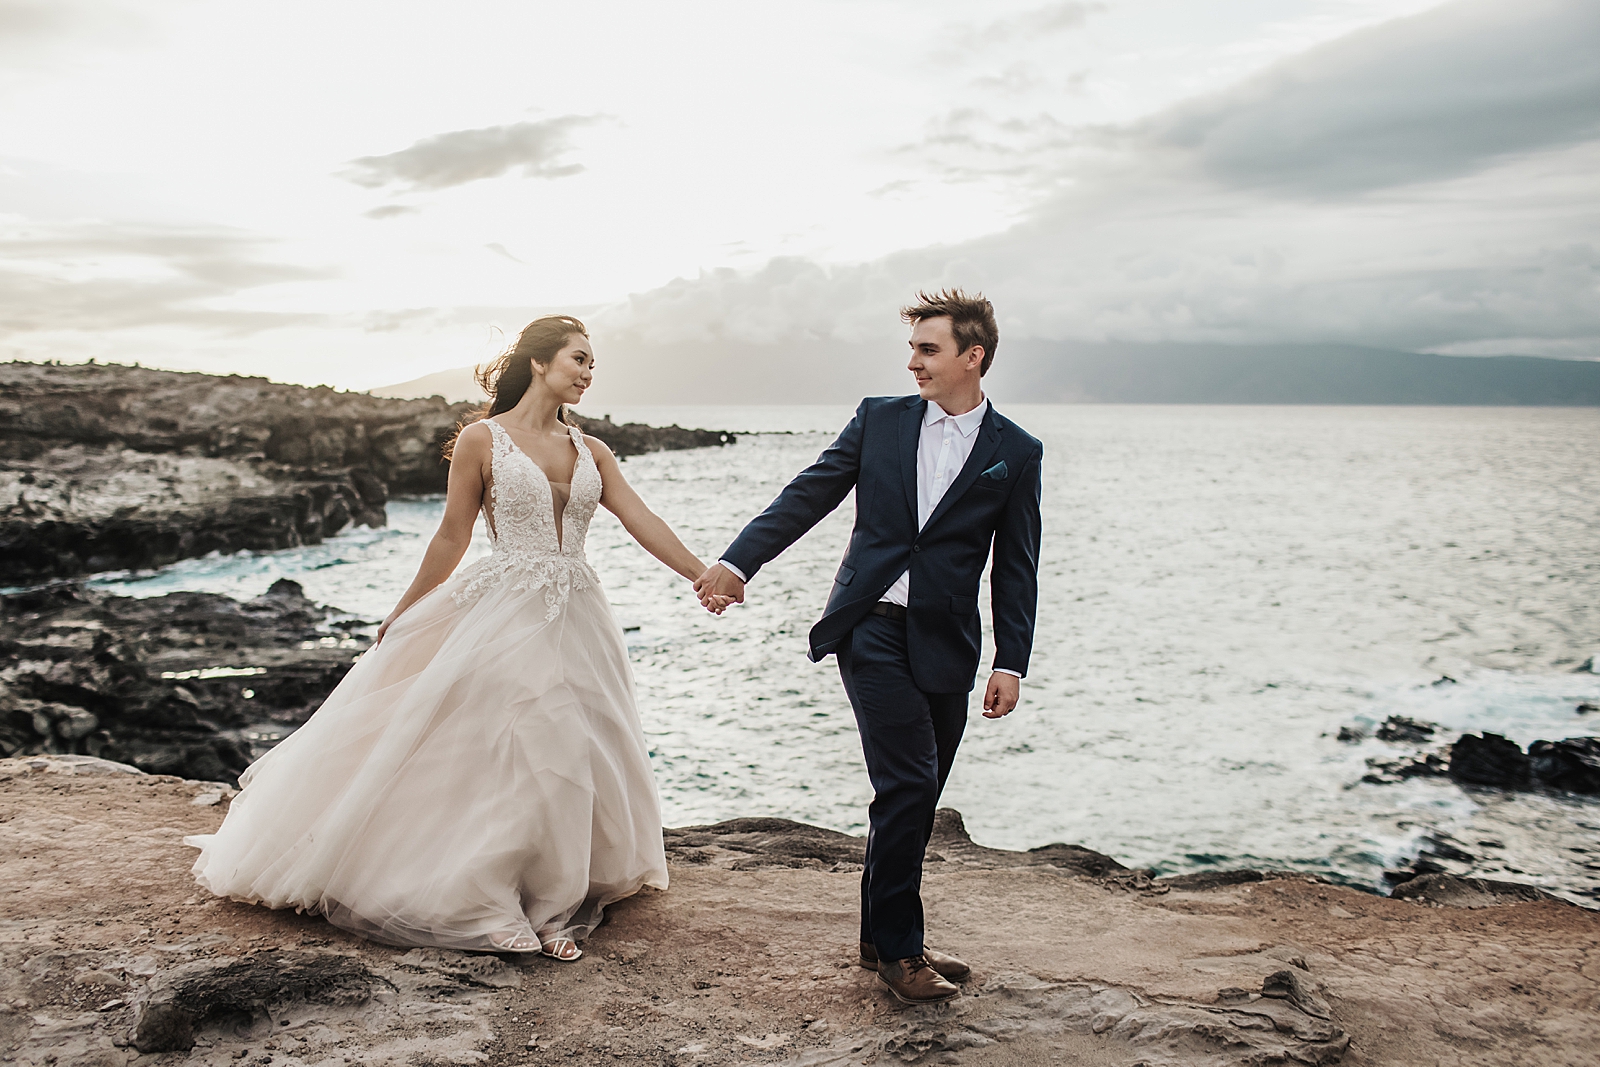 Groom holding Bride's hand leading by cliff side by the ocean